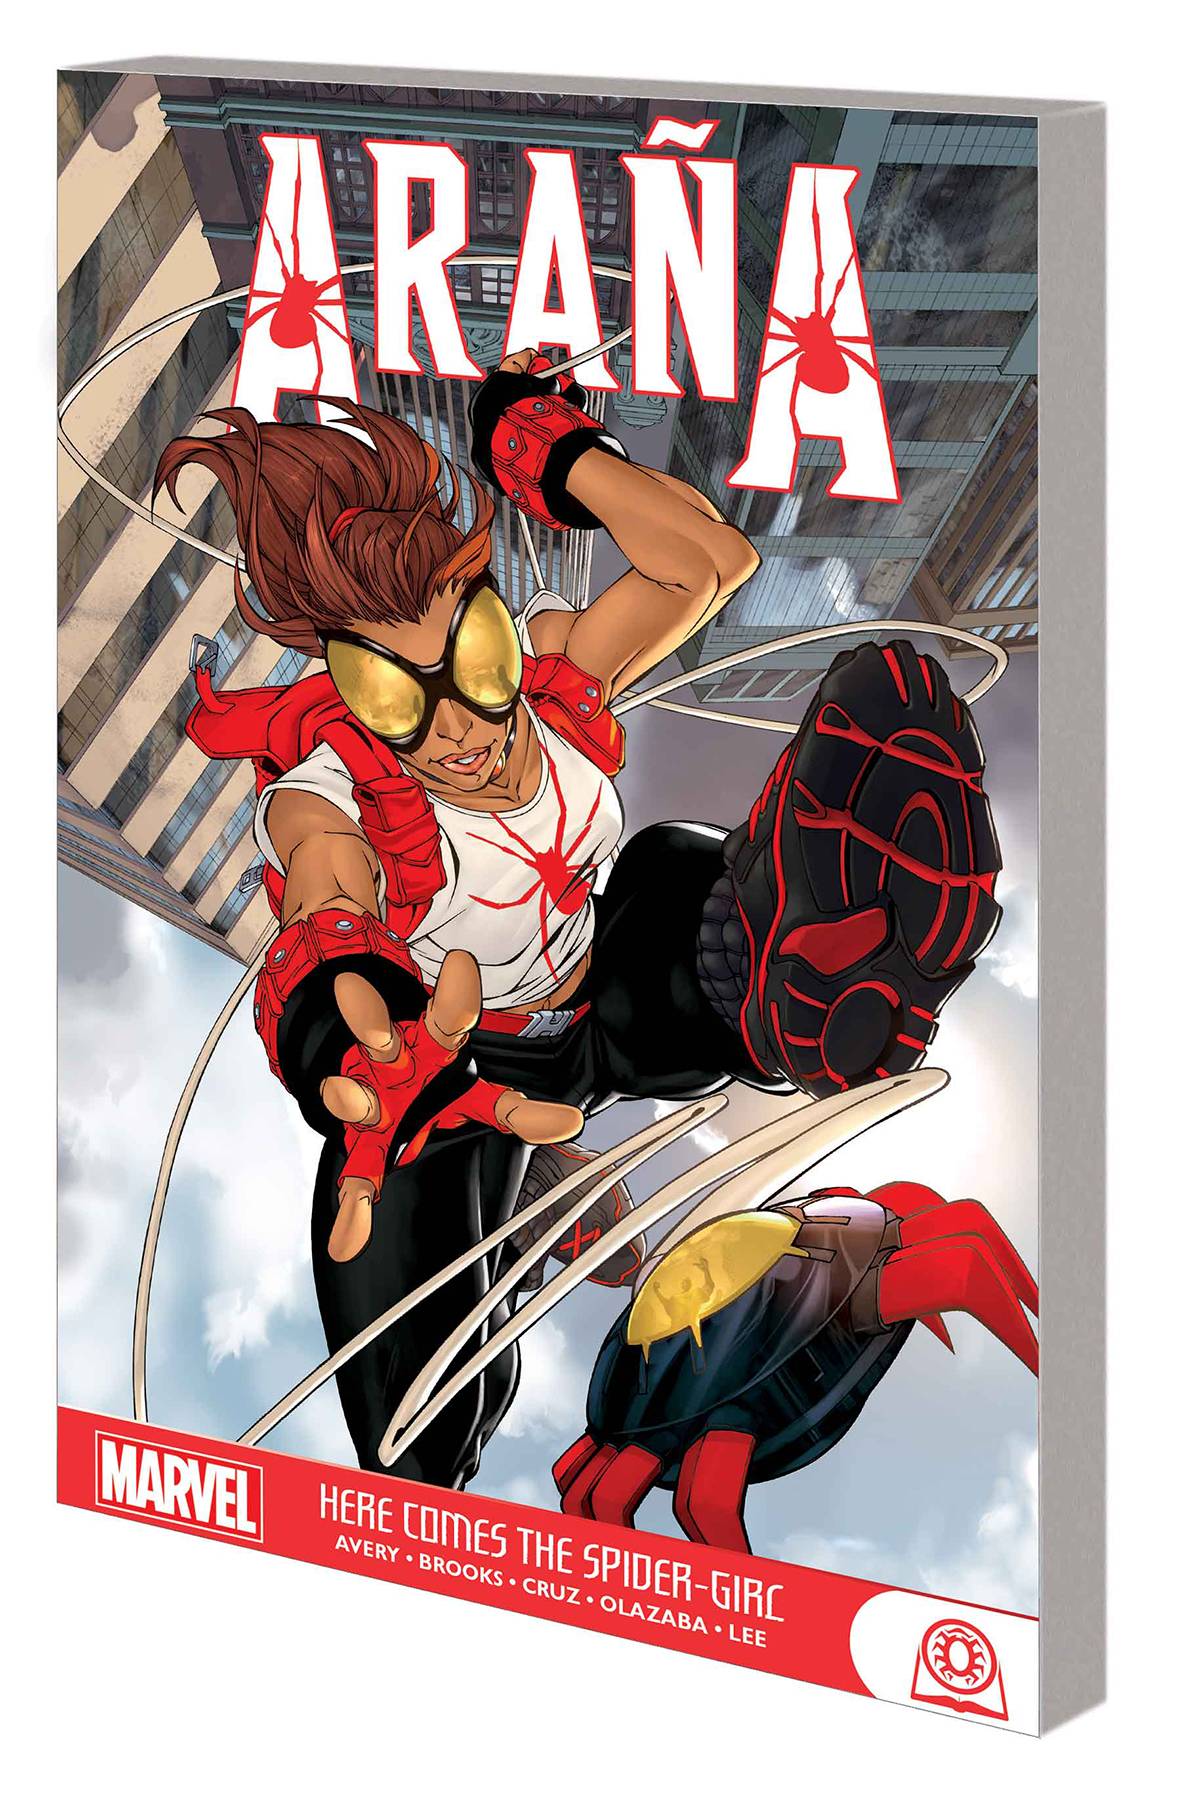 Arana Here Comes The Spider-Girl Gn-Tpb